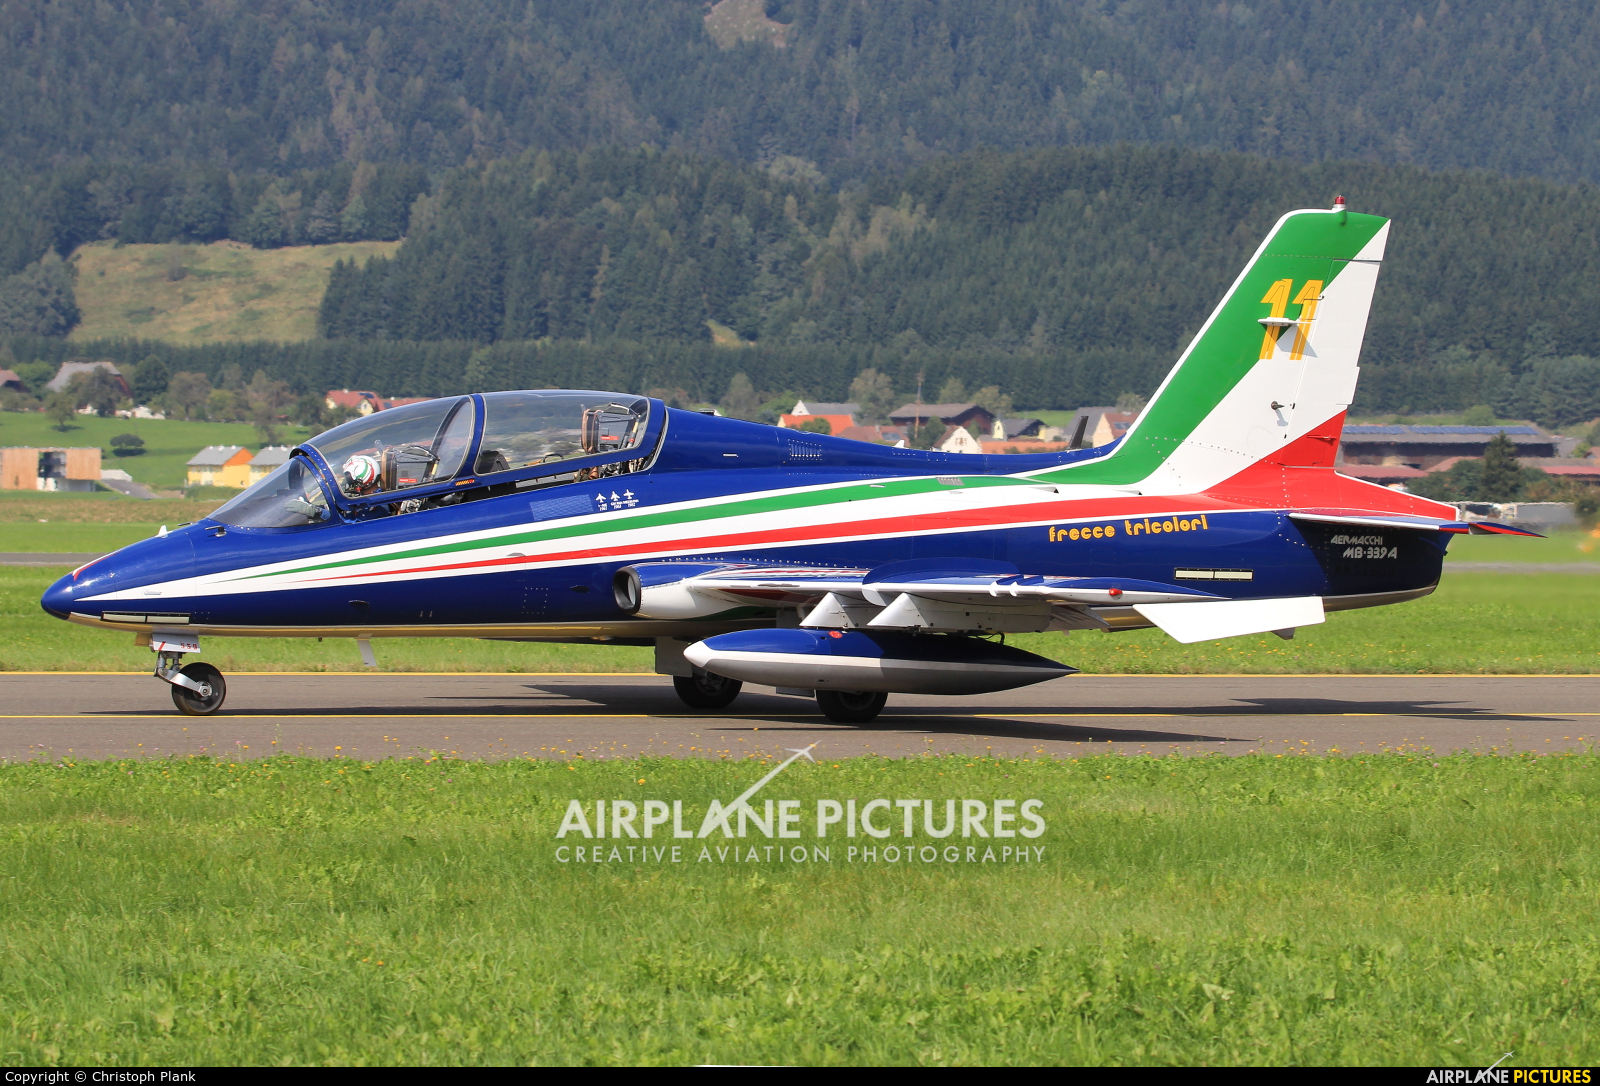 Italy - Air Force "Frecce Tricolori" MM54539 aircraft at Zeltweg